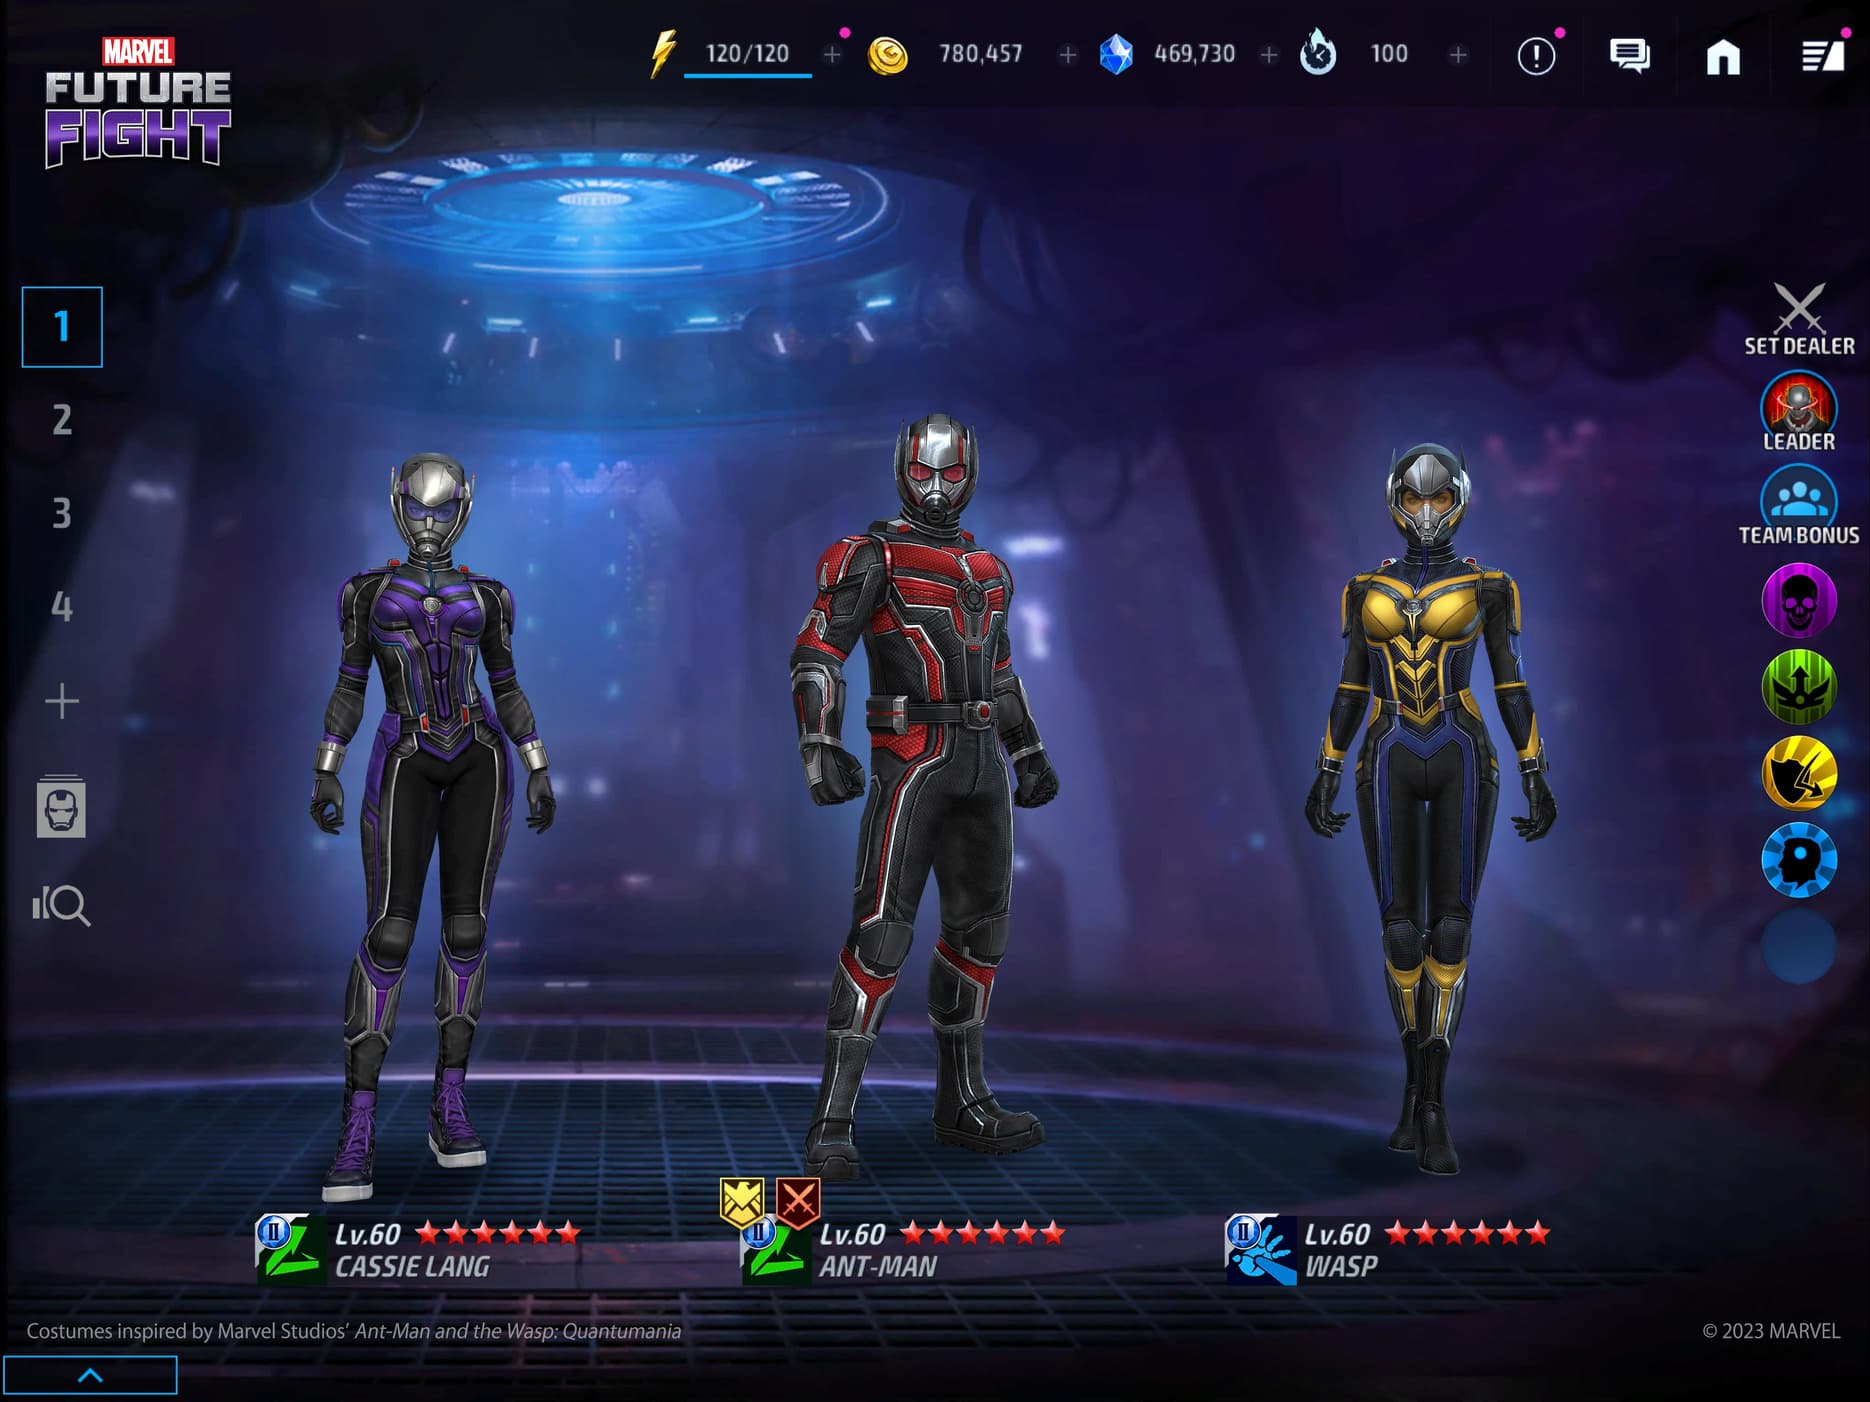 MARVEL Future Fight update inspired by Marvel Studios' Ant-Man and the Wasp: Quantumania